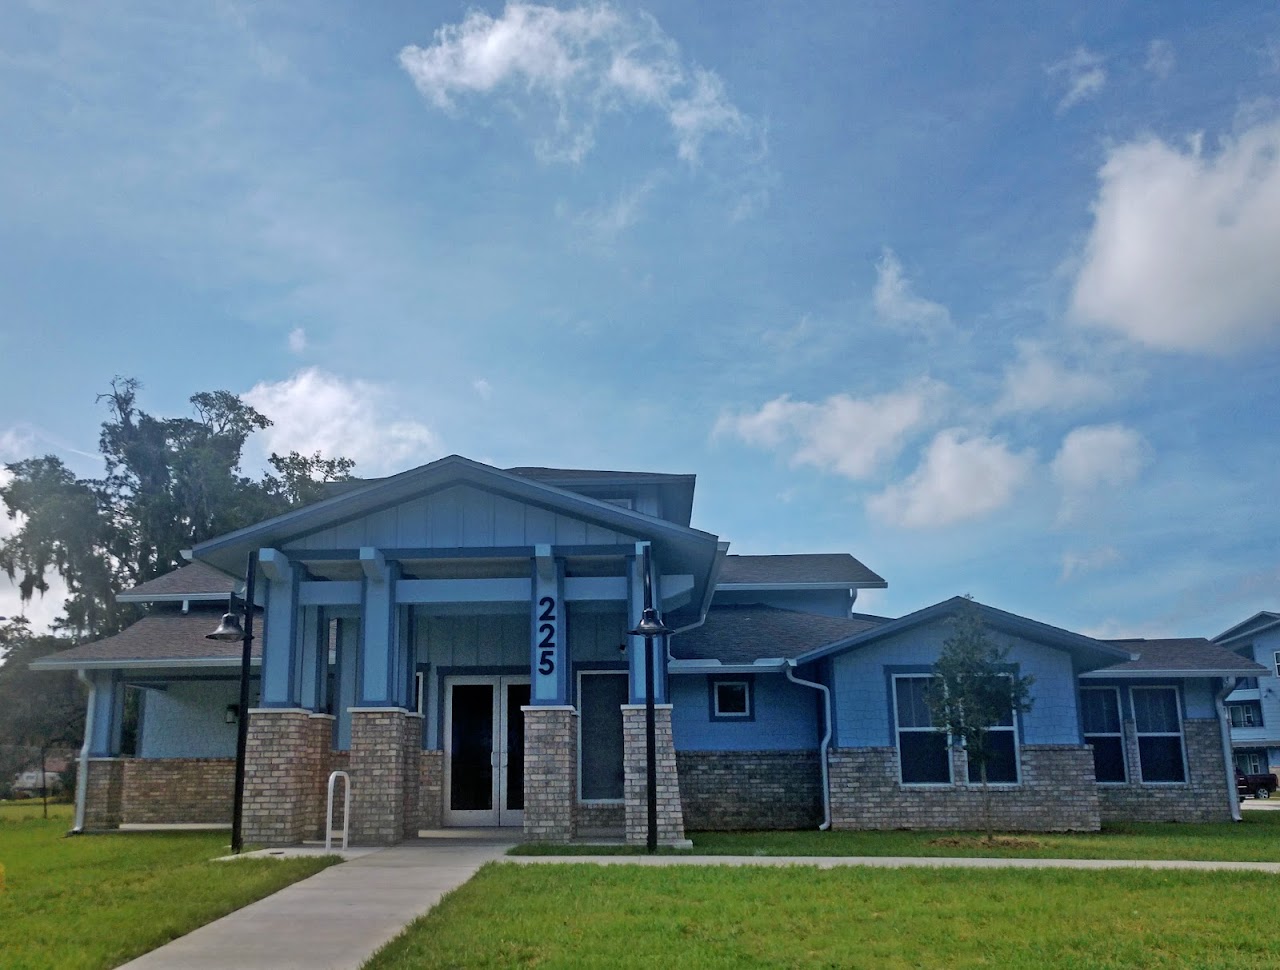 Photo of GROVE AT SWEETWATER PRESERVE. Affordable housing located at 225 SOUTHEAST 19TH PLACE GAINESVILLE, FL 32641